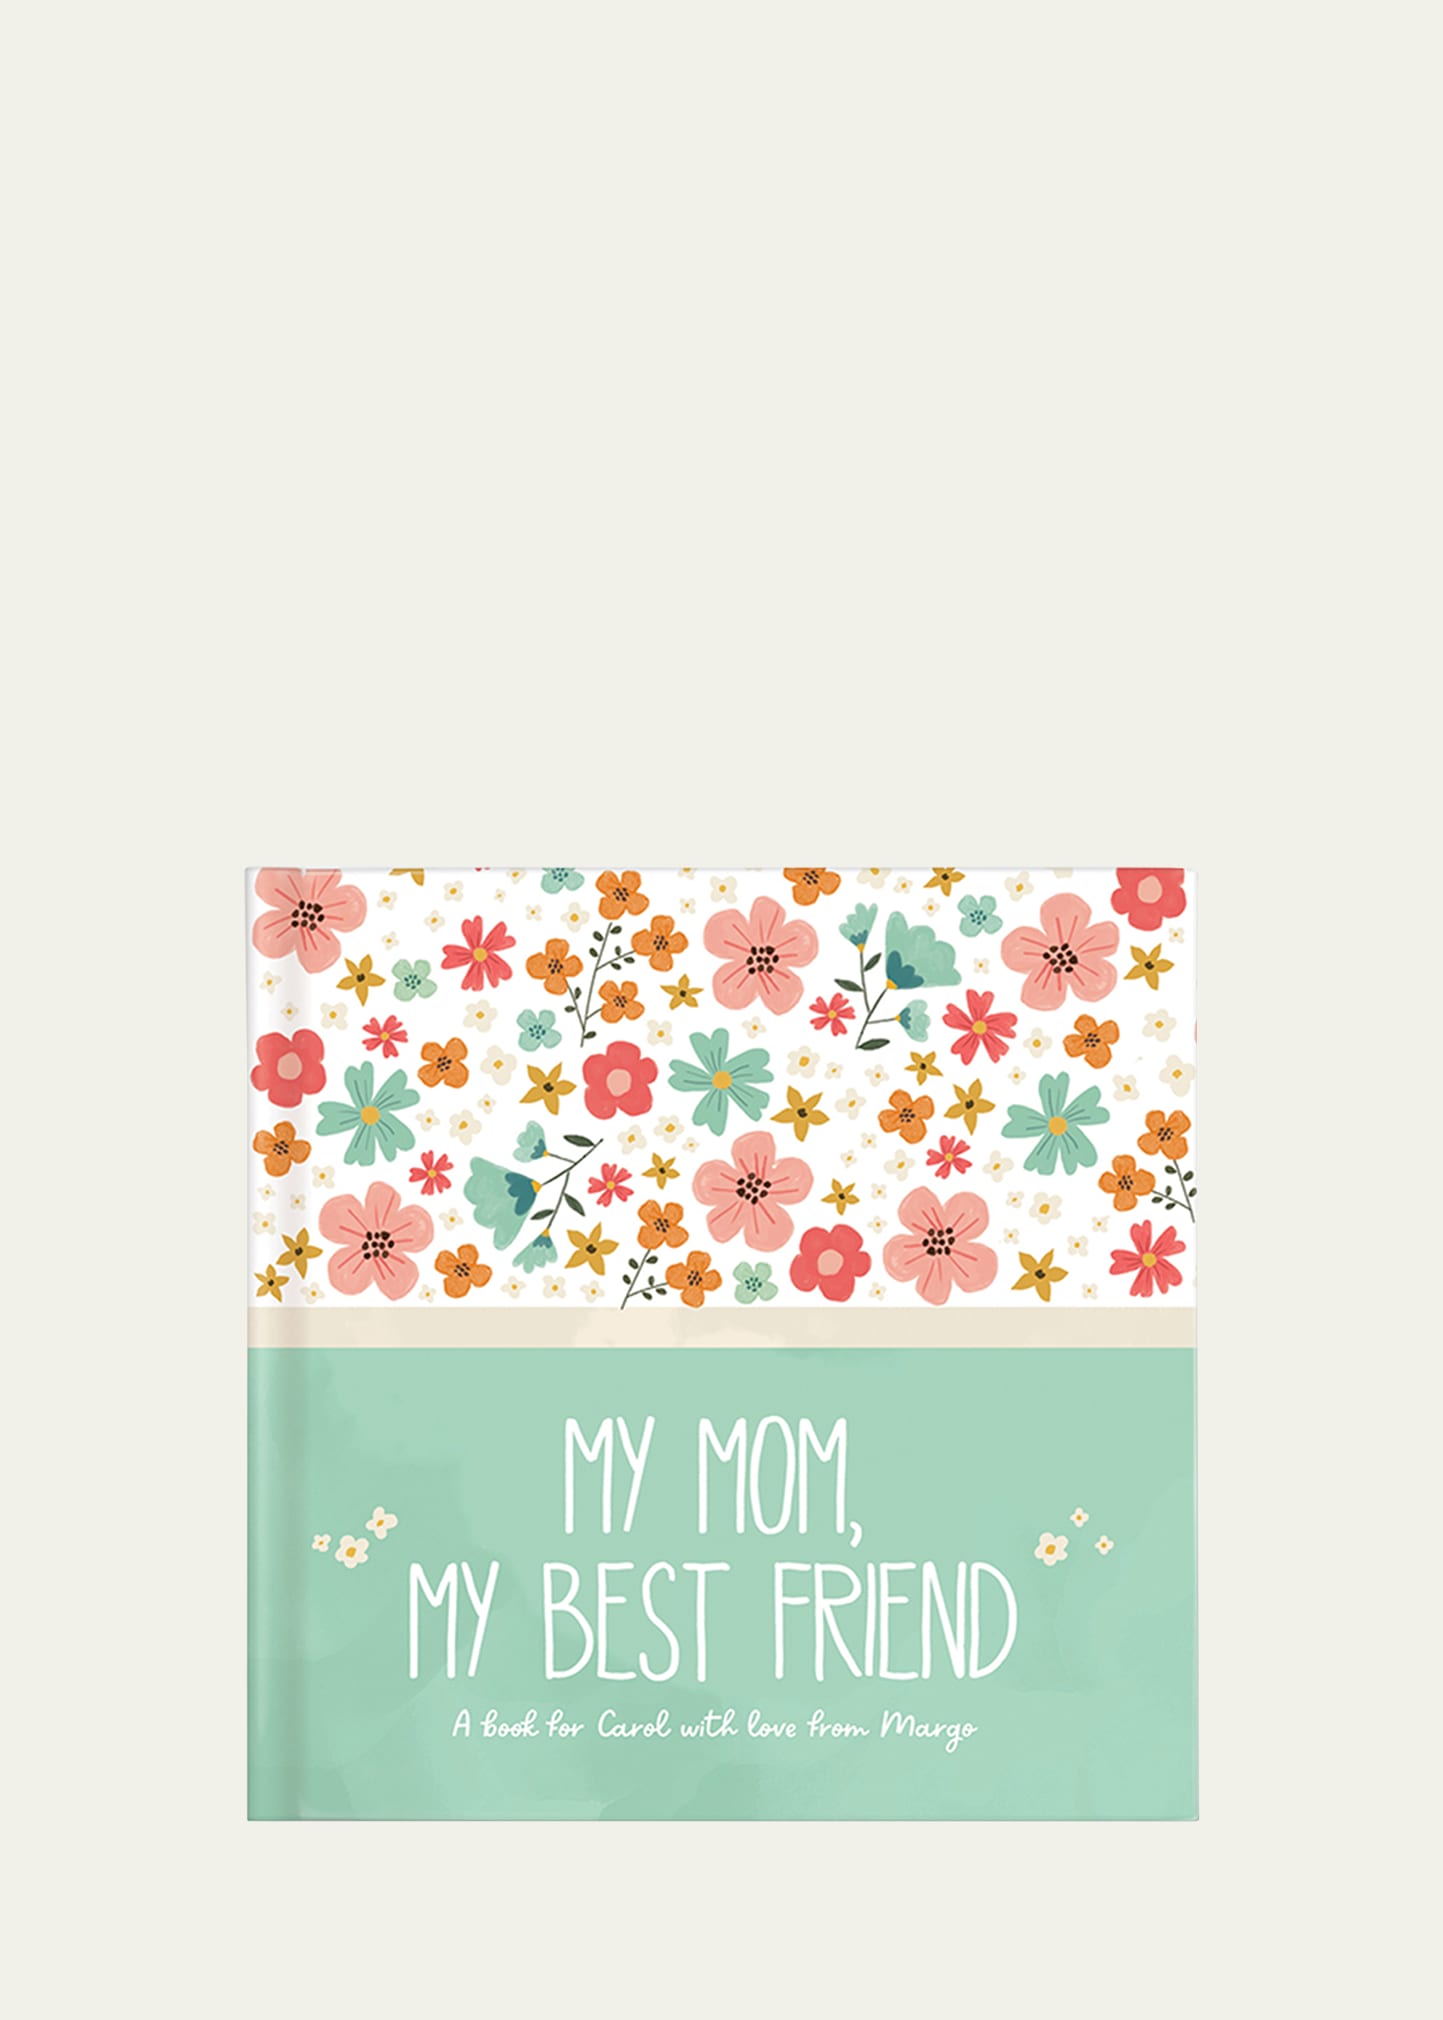 I See Me My Mom, My Best Friend Personalized Book by Caroline Burns